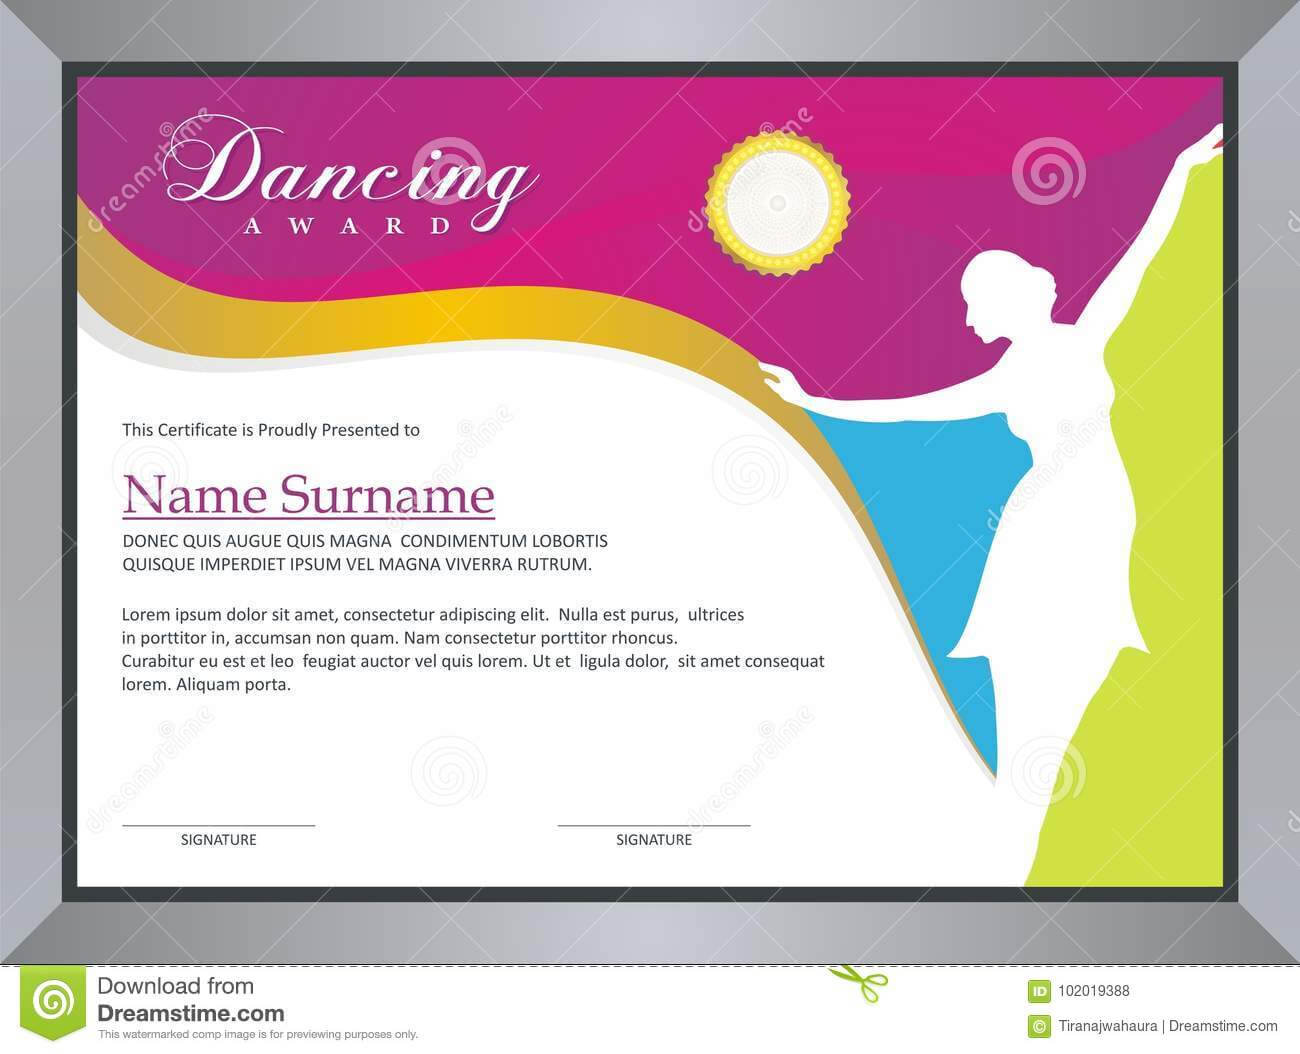 Dancing Award Stock Vector. Illustration Of Ballet With Dance Certificate Template